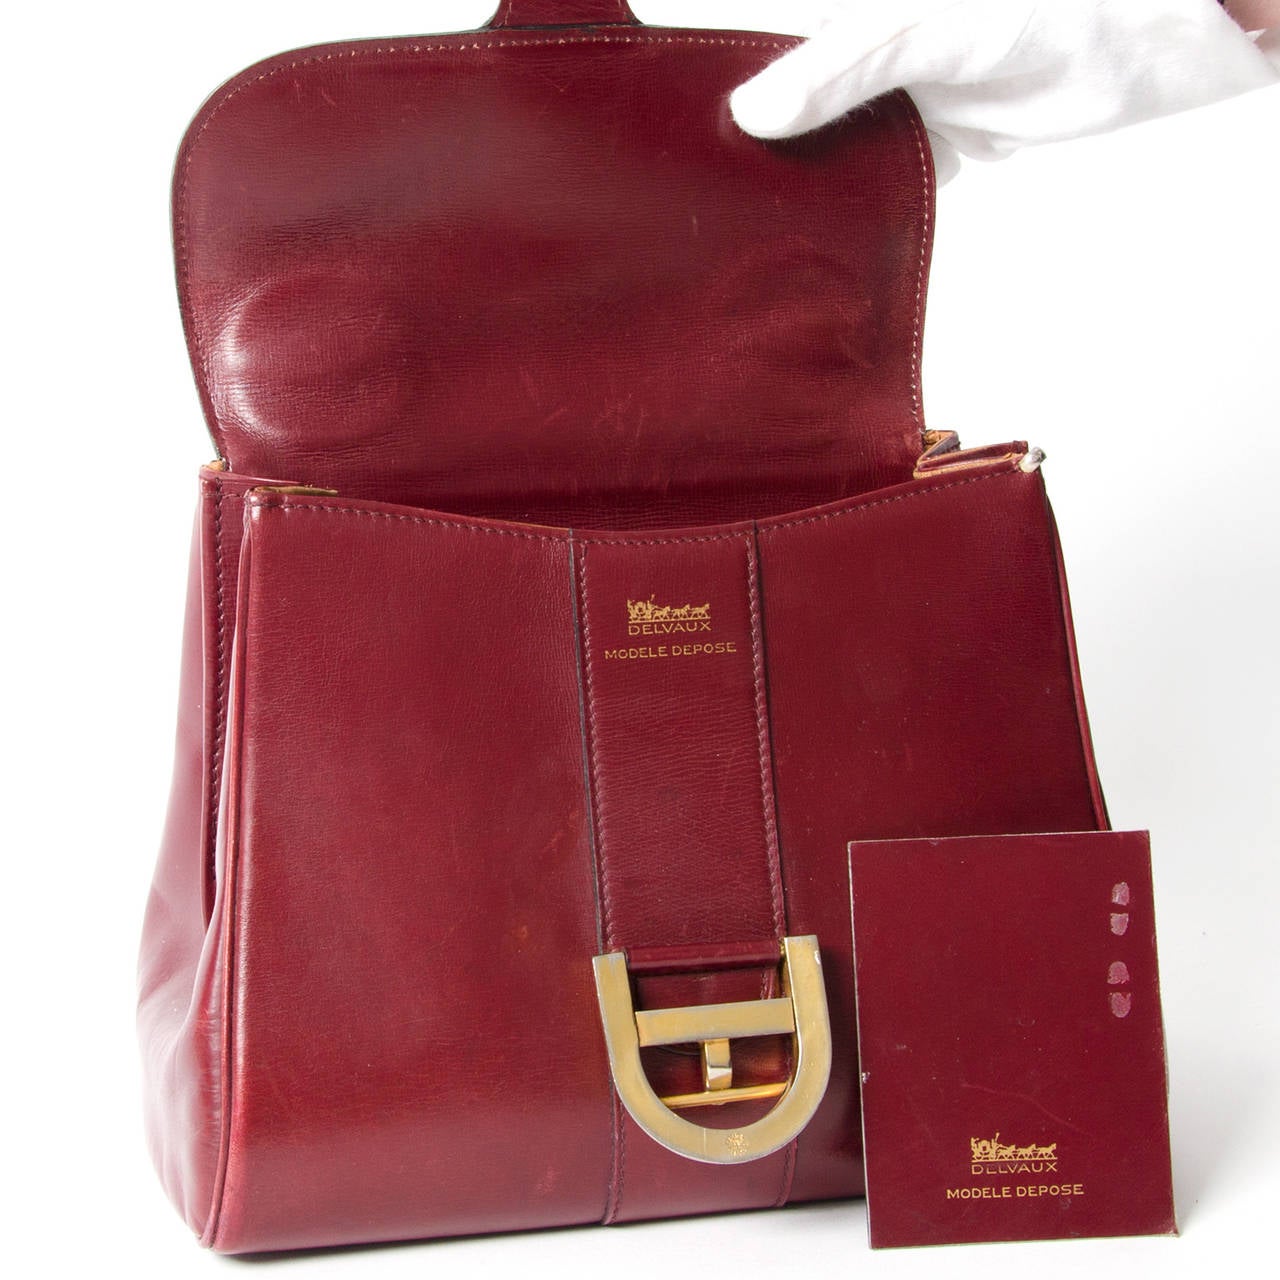 Delvaux Brillant Bordeaux PM with gold hardware in a gorgeous bordeaux red leather material. This classic satchel from premium Belgium luxury leather goods brand Delvaux excels in both style and quality. Top handle for comfortable and elegant use.